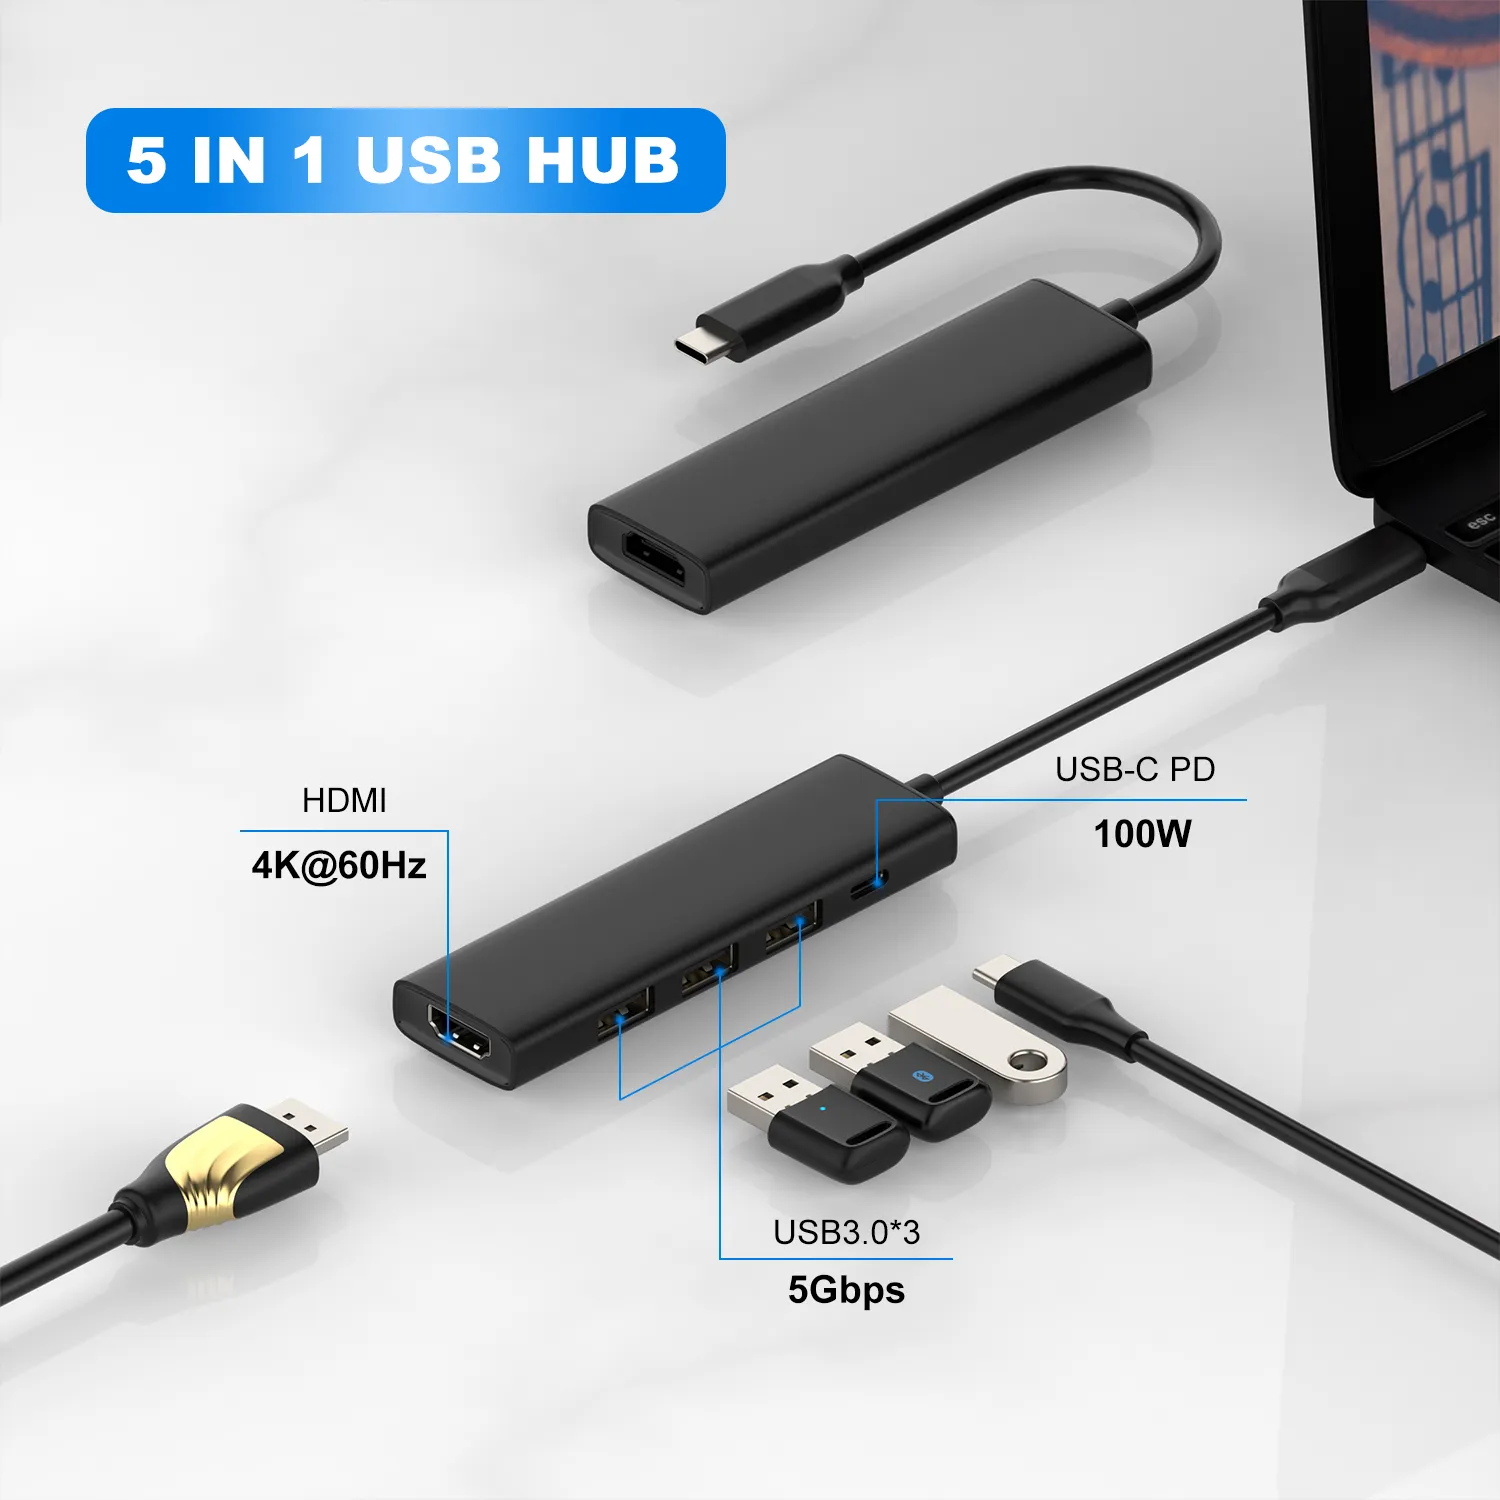 USB-C Multi Port Adapter 5 in 1 with 4K60HZ Output 100W Power Delivery USB C HUB